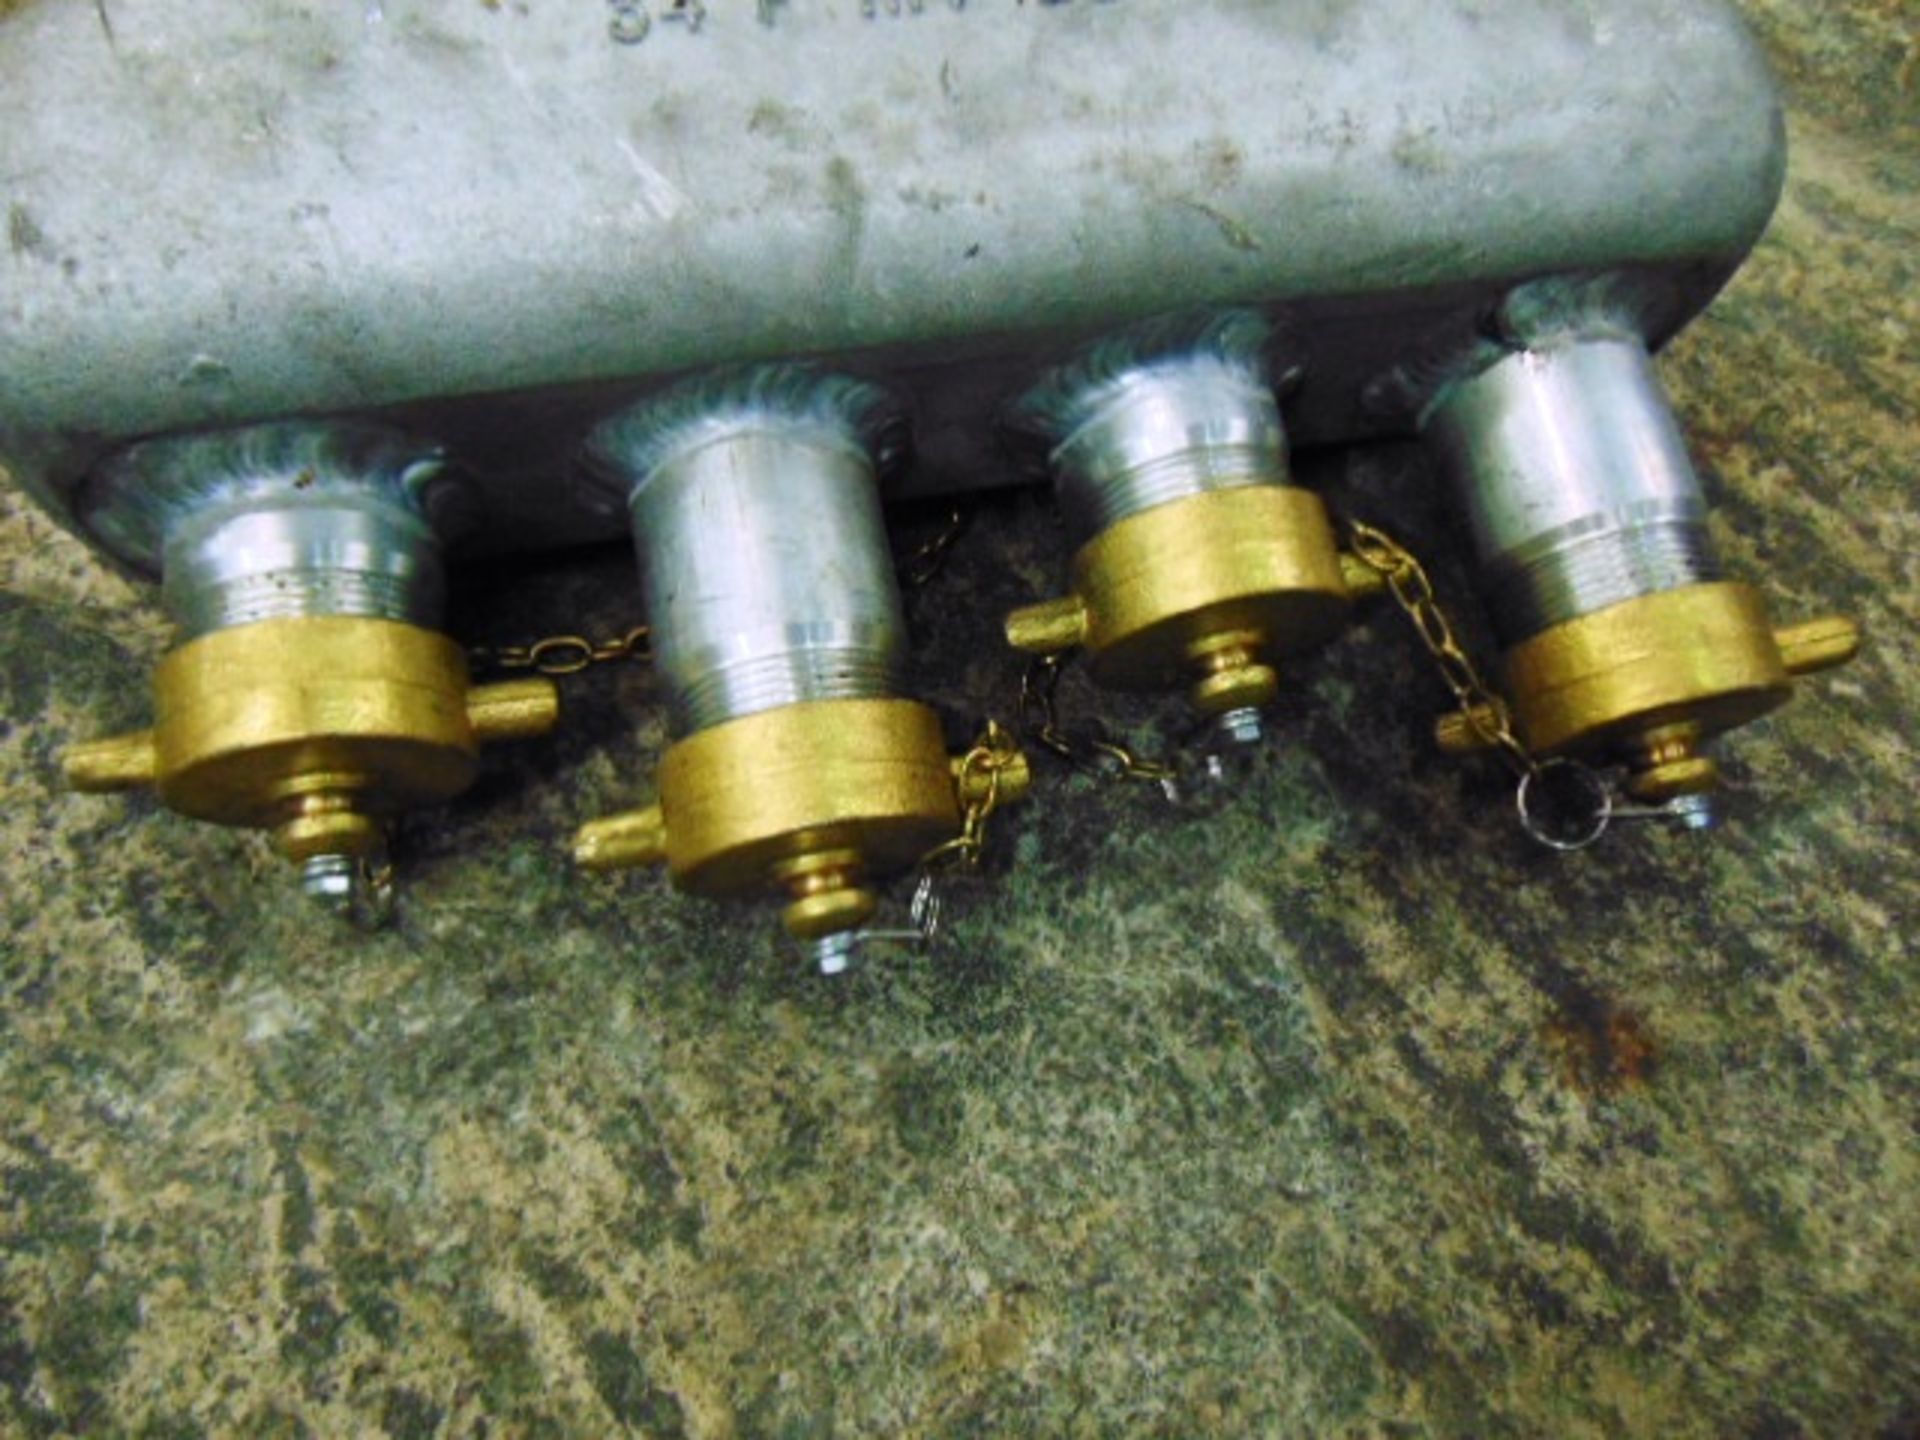 5 x 4 Way Fuel/Water Distribution Manifolds - Image 3 of 6